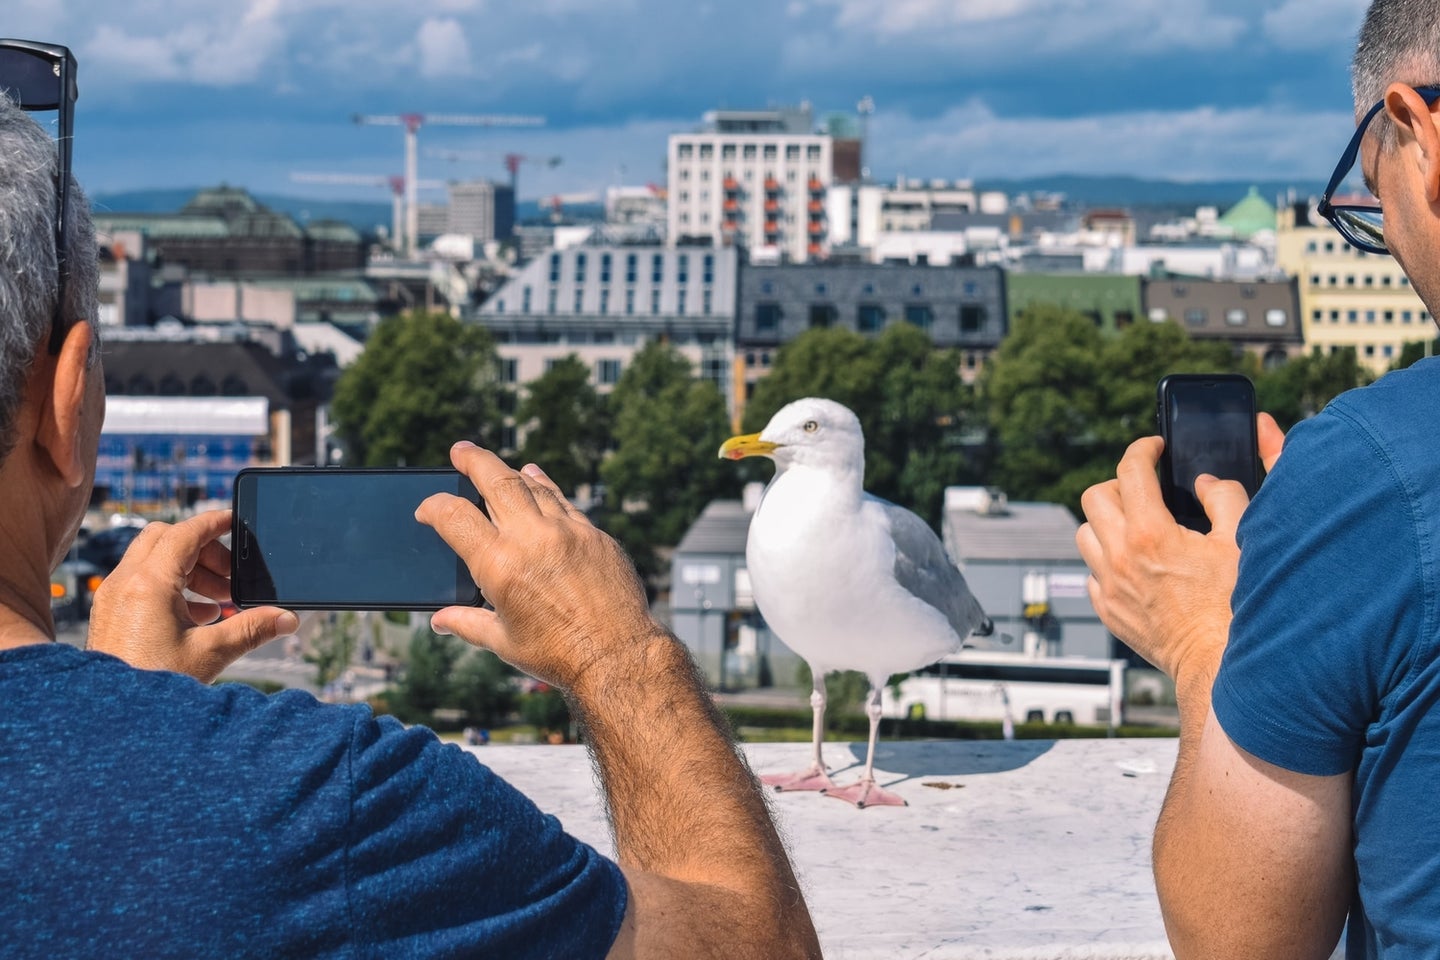 Two tourists using their phones to photograph a gull in front of a city skyline